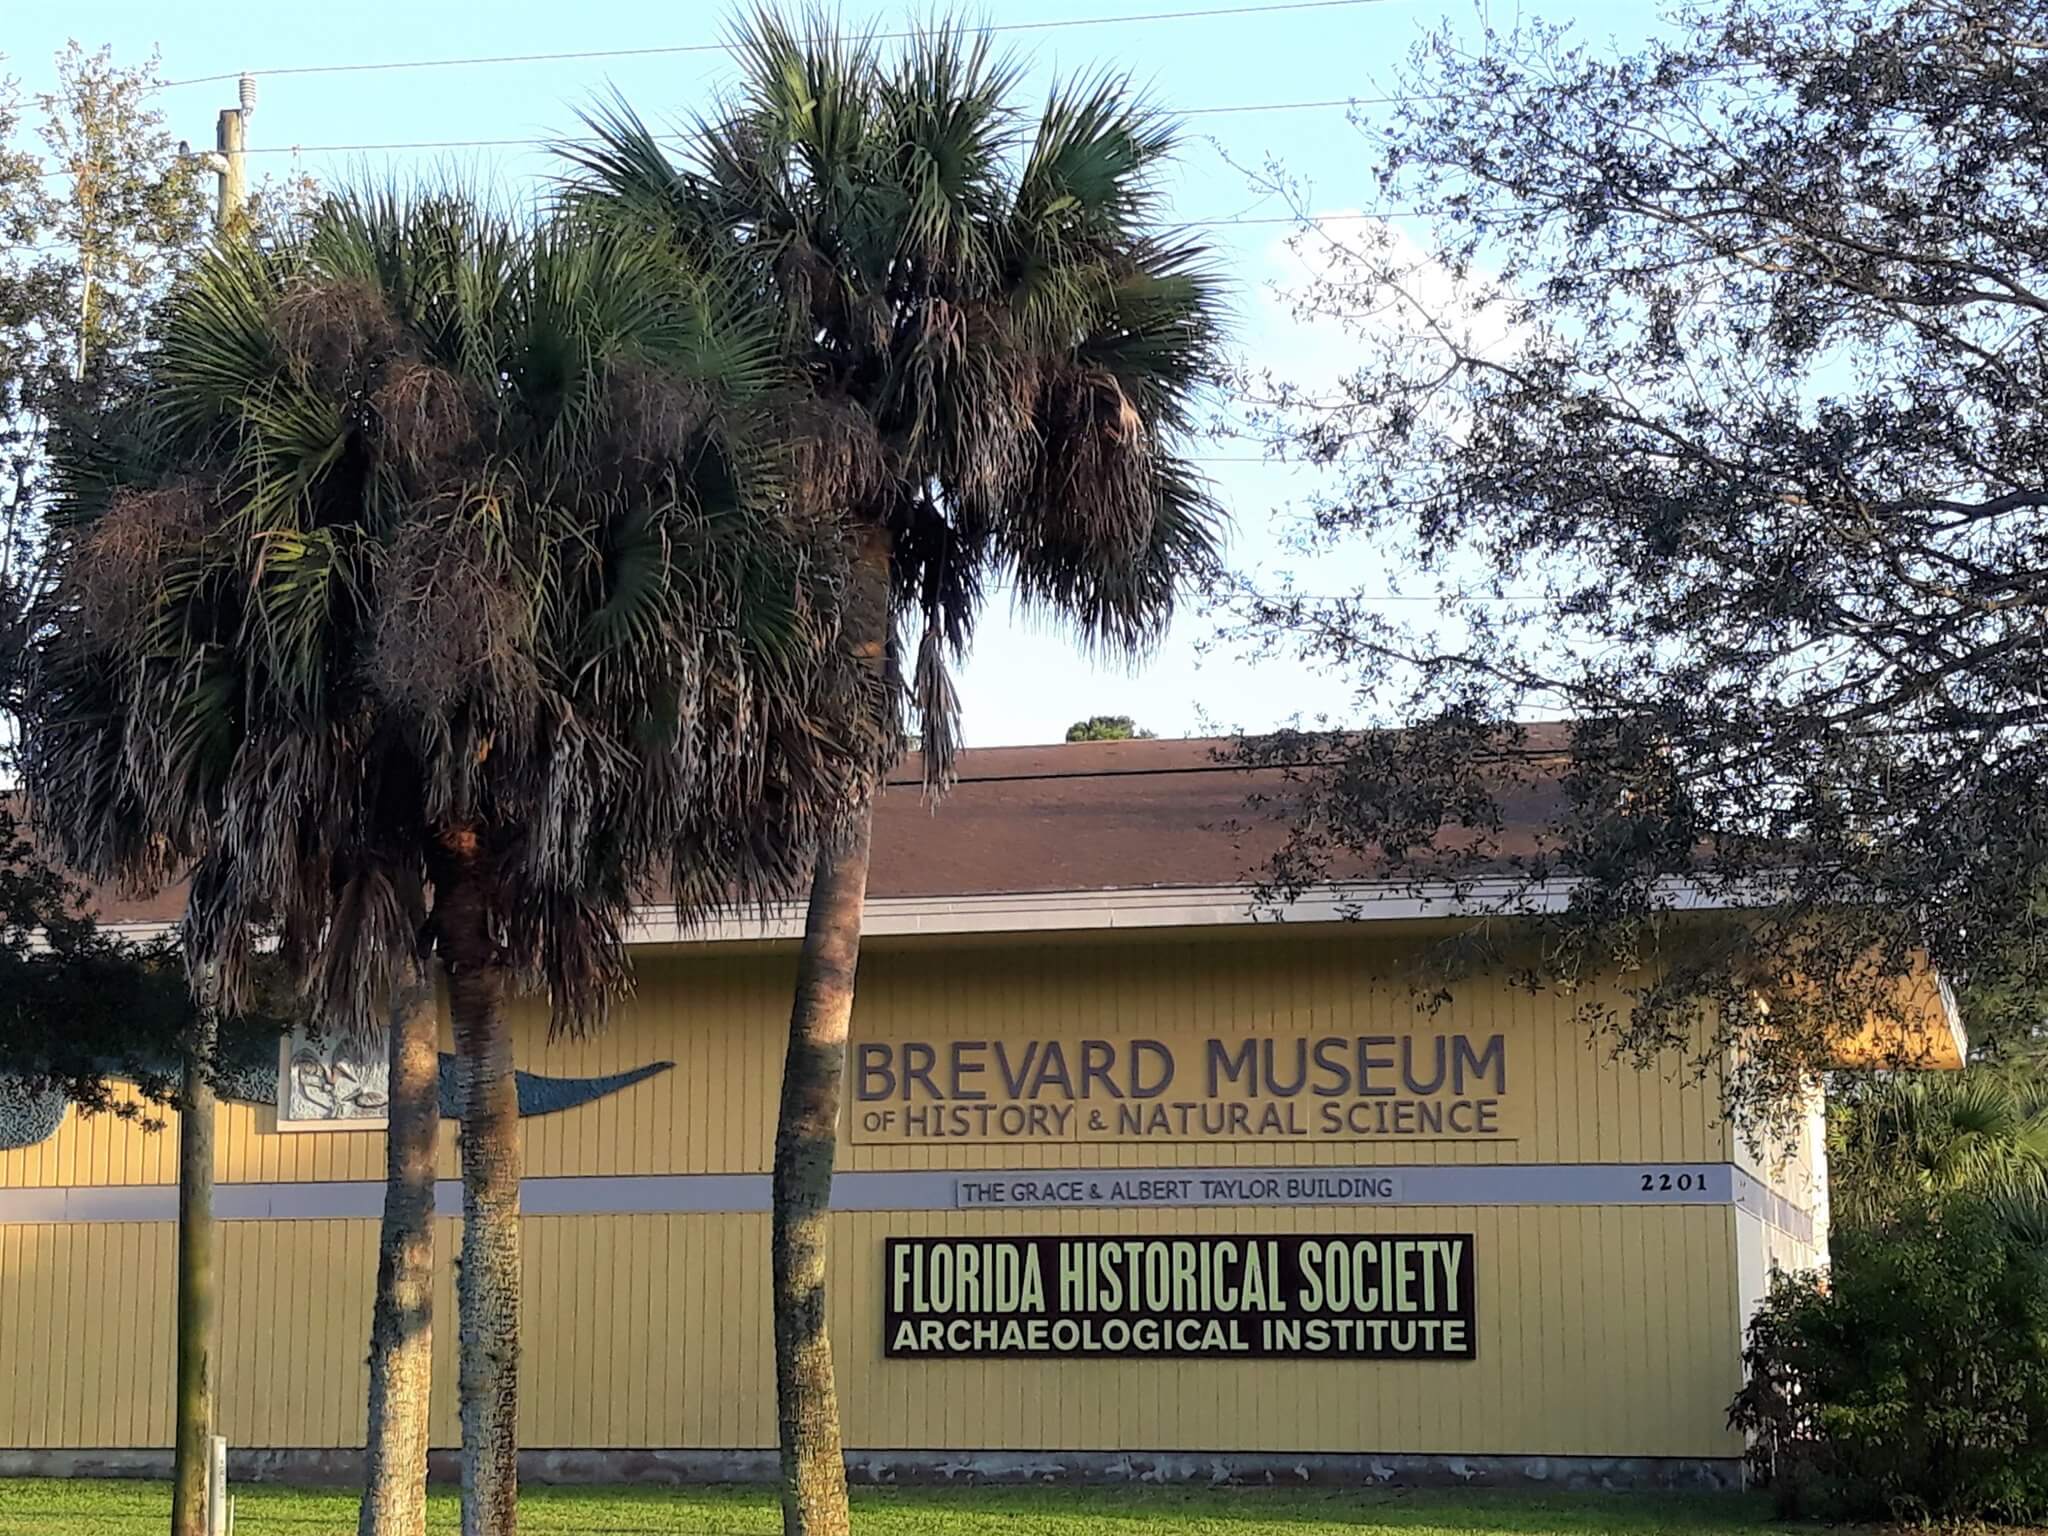 Building that has the wording on the side, Brevard Museum of History and Natural Science, Florida Historical Society Archaeological Institute. 